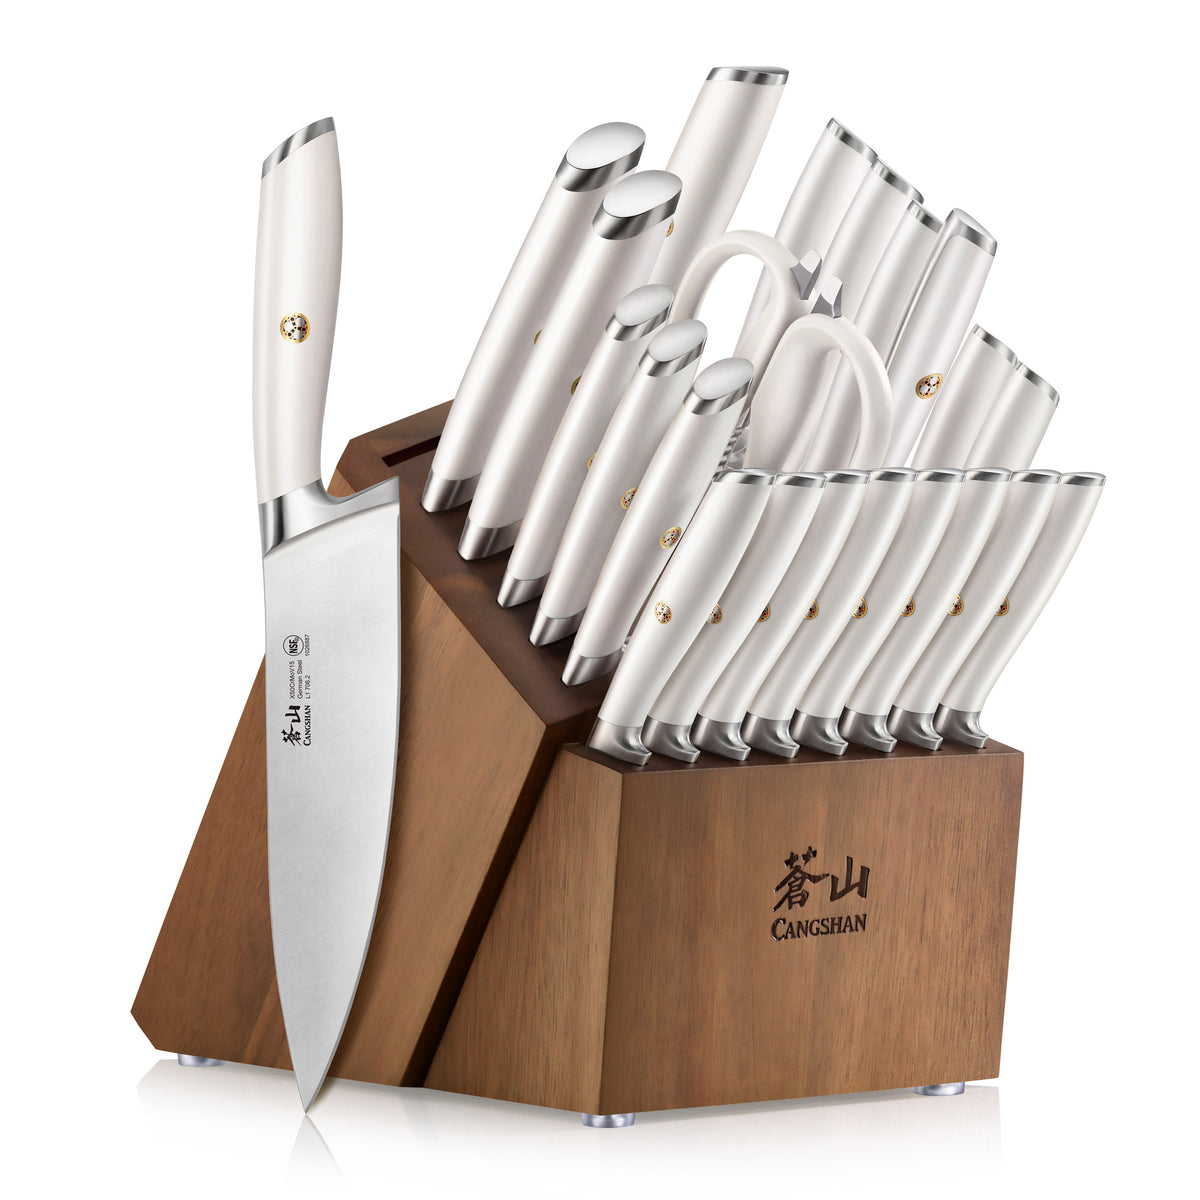 L O V E this white and gold knife block set from ! It's a 14 pc